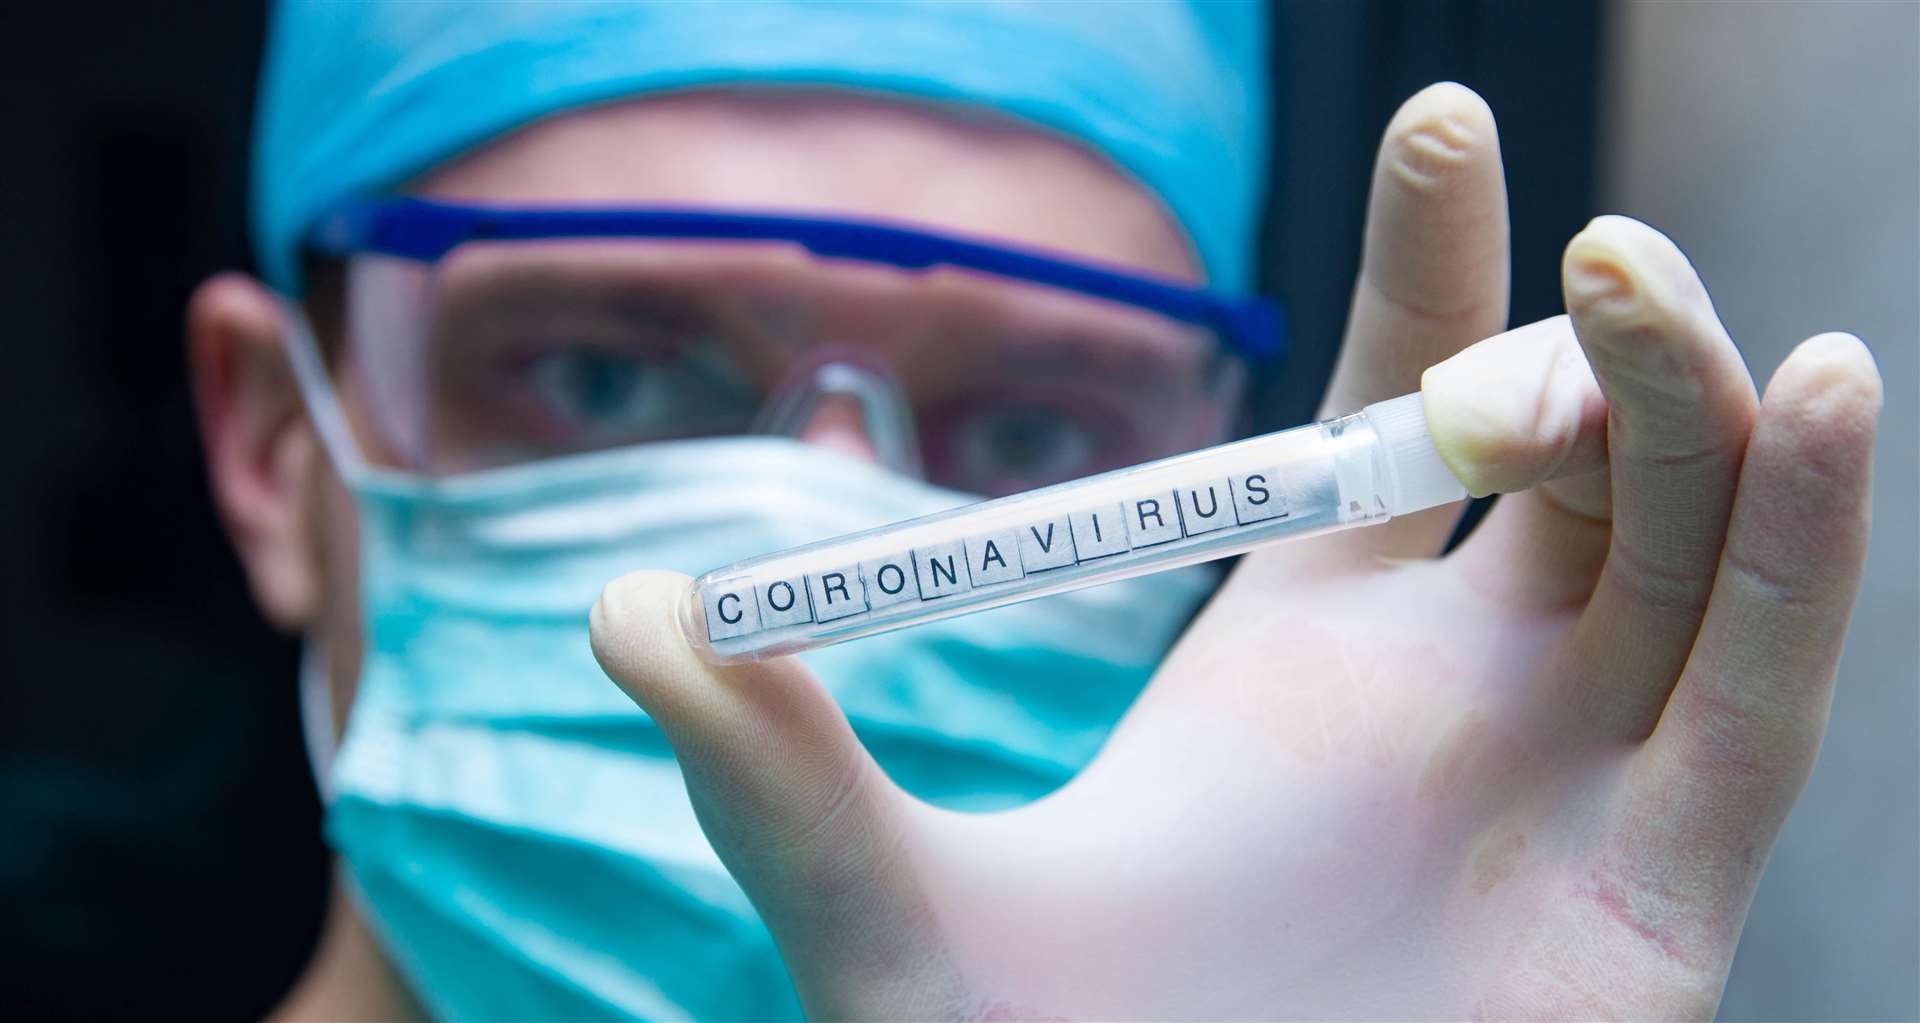 Many treatment myths have sprung up in the wake of the coronavirus.